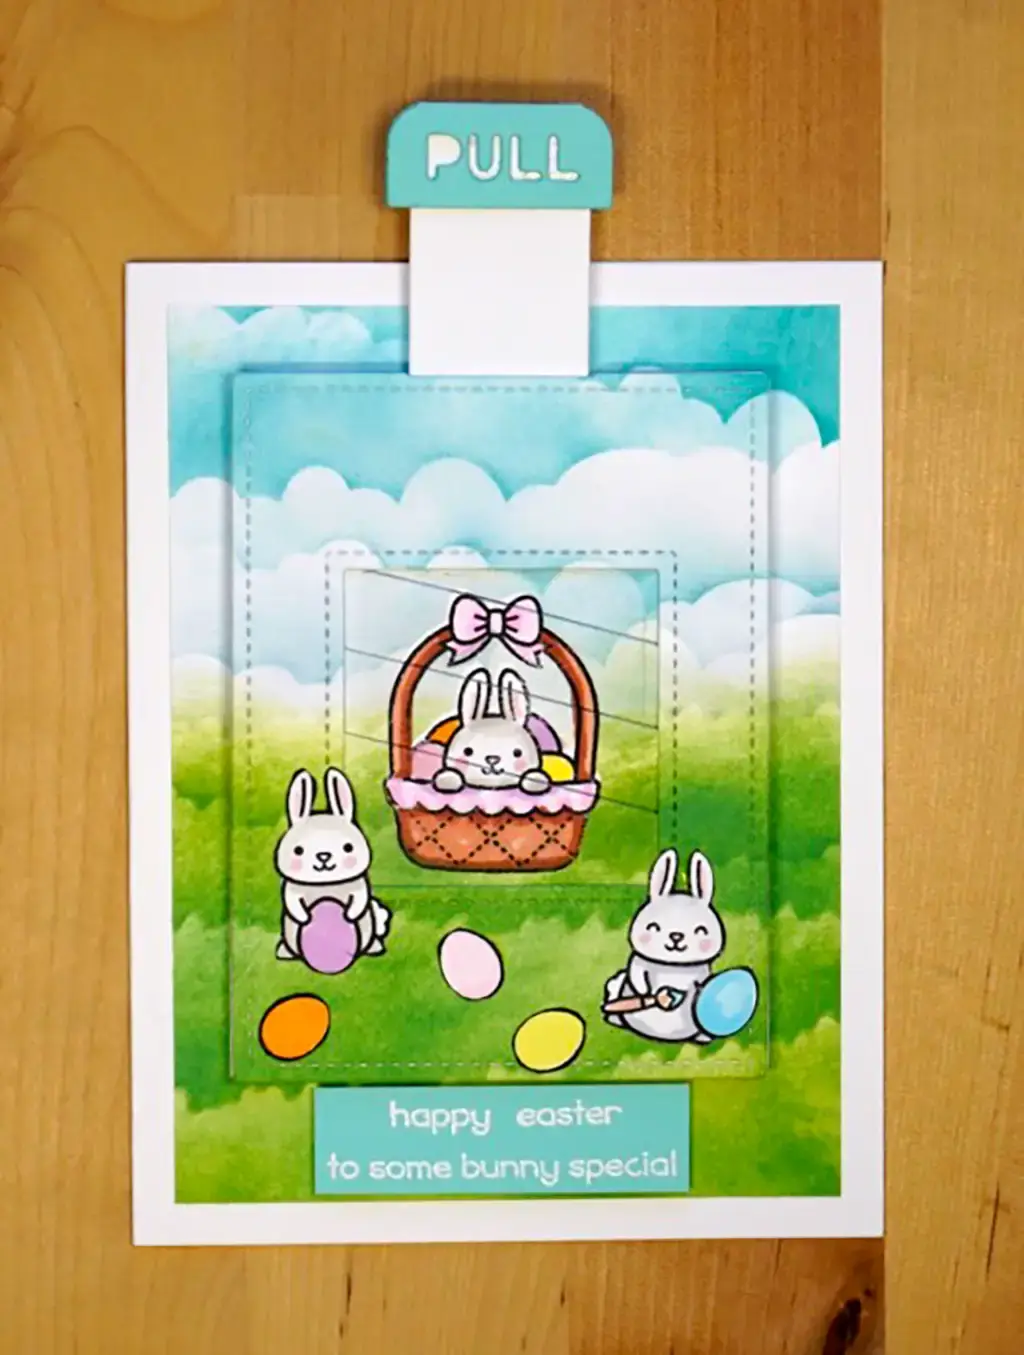 An outrageously adorable card with an Easter bunny in a basket.